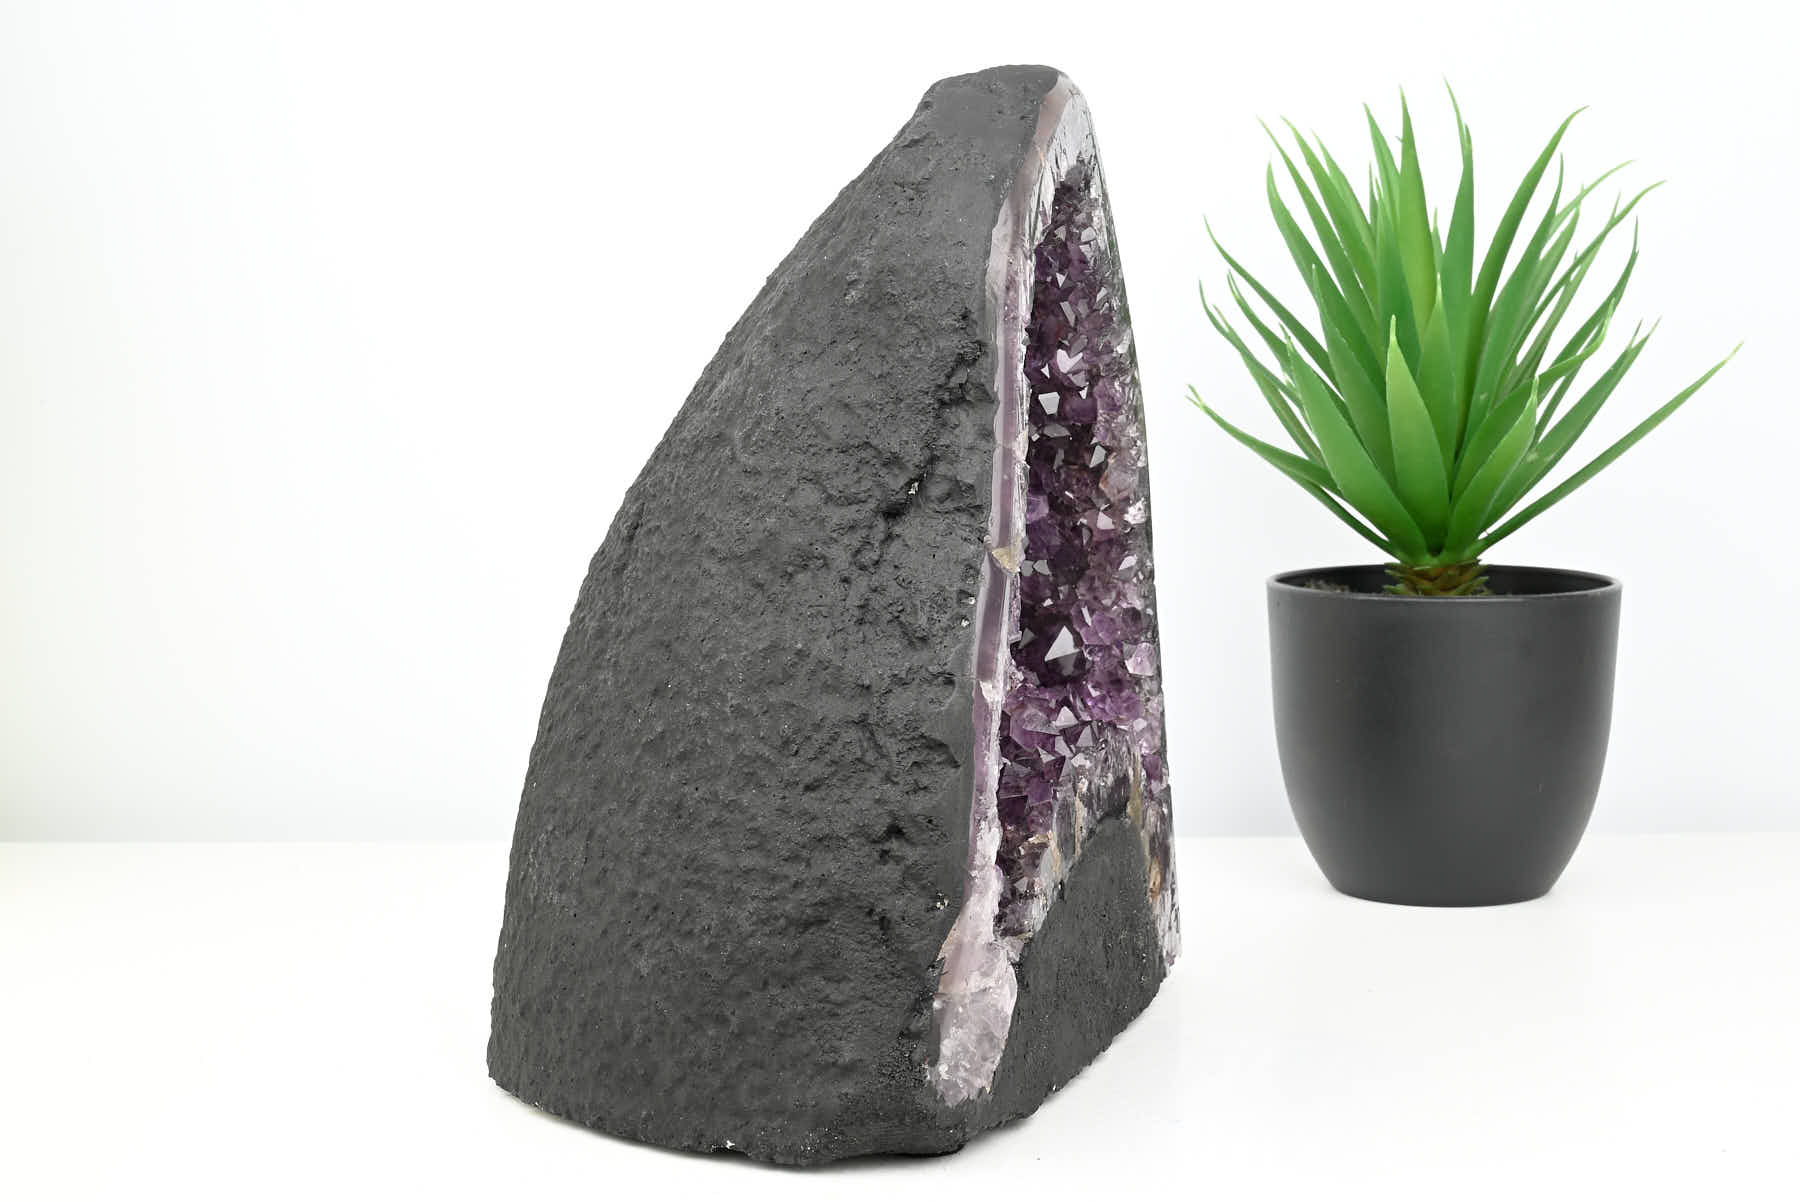 Extra Quality Amethyst Cathedral - 4.96kg, 22cm tall - #CAAMET-10010